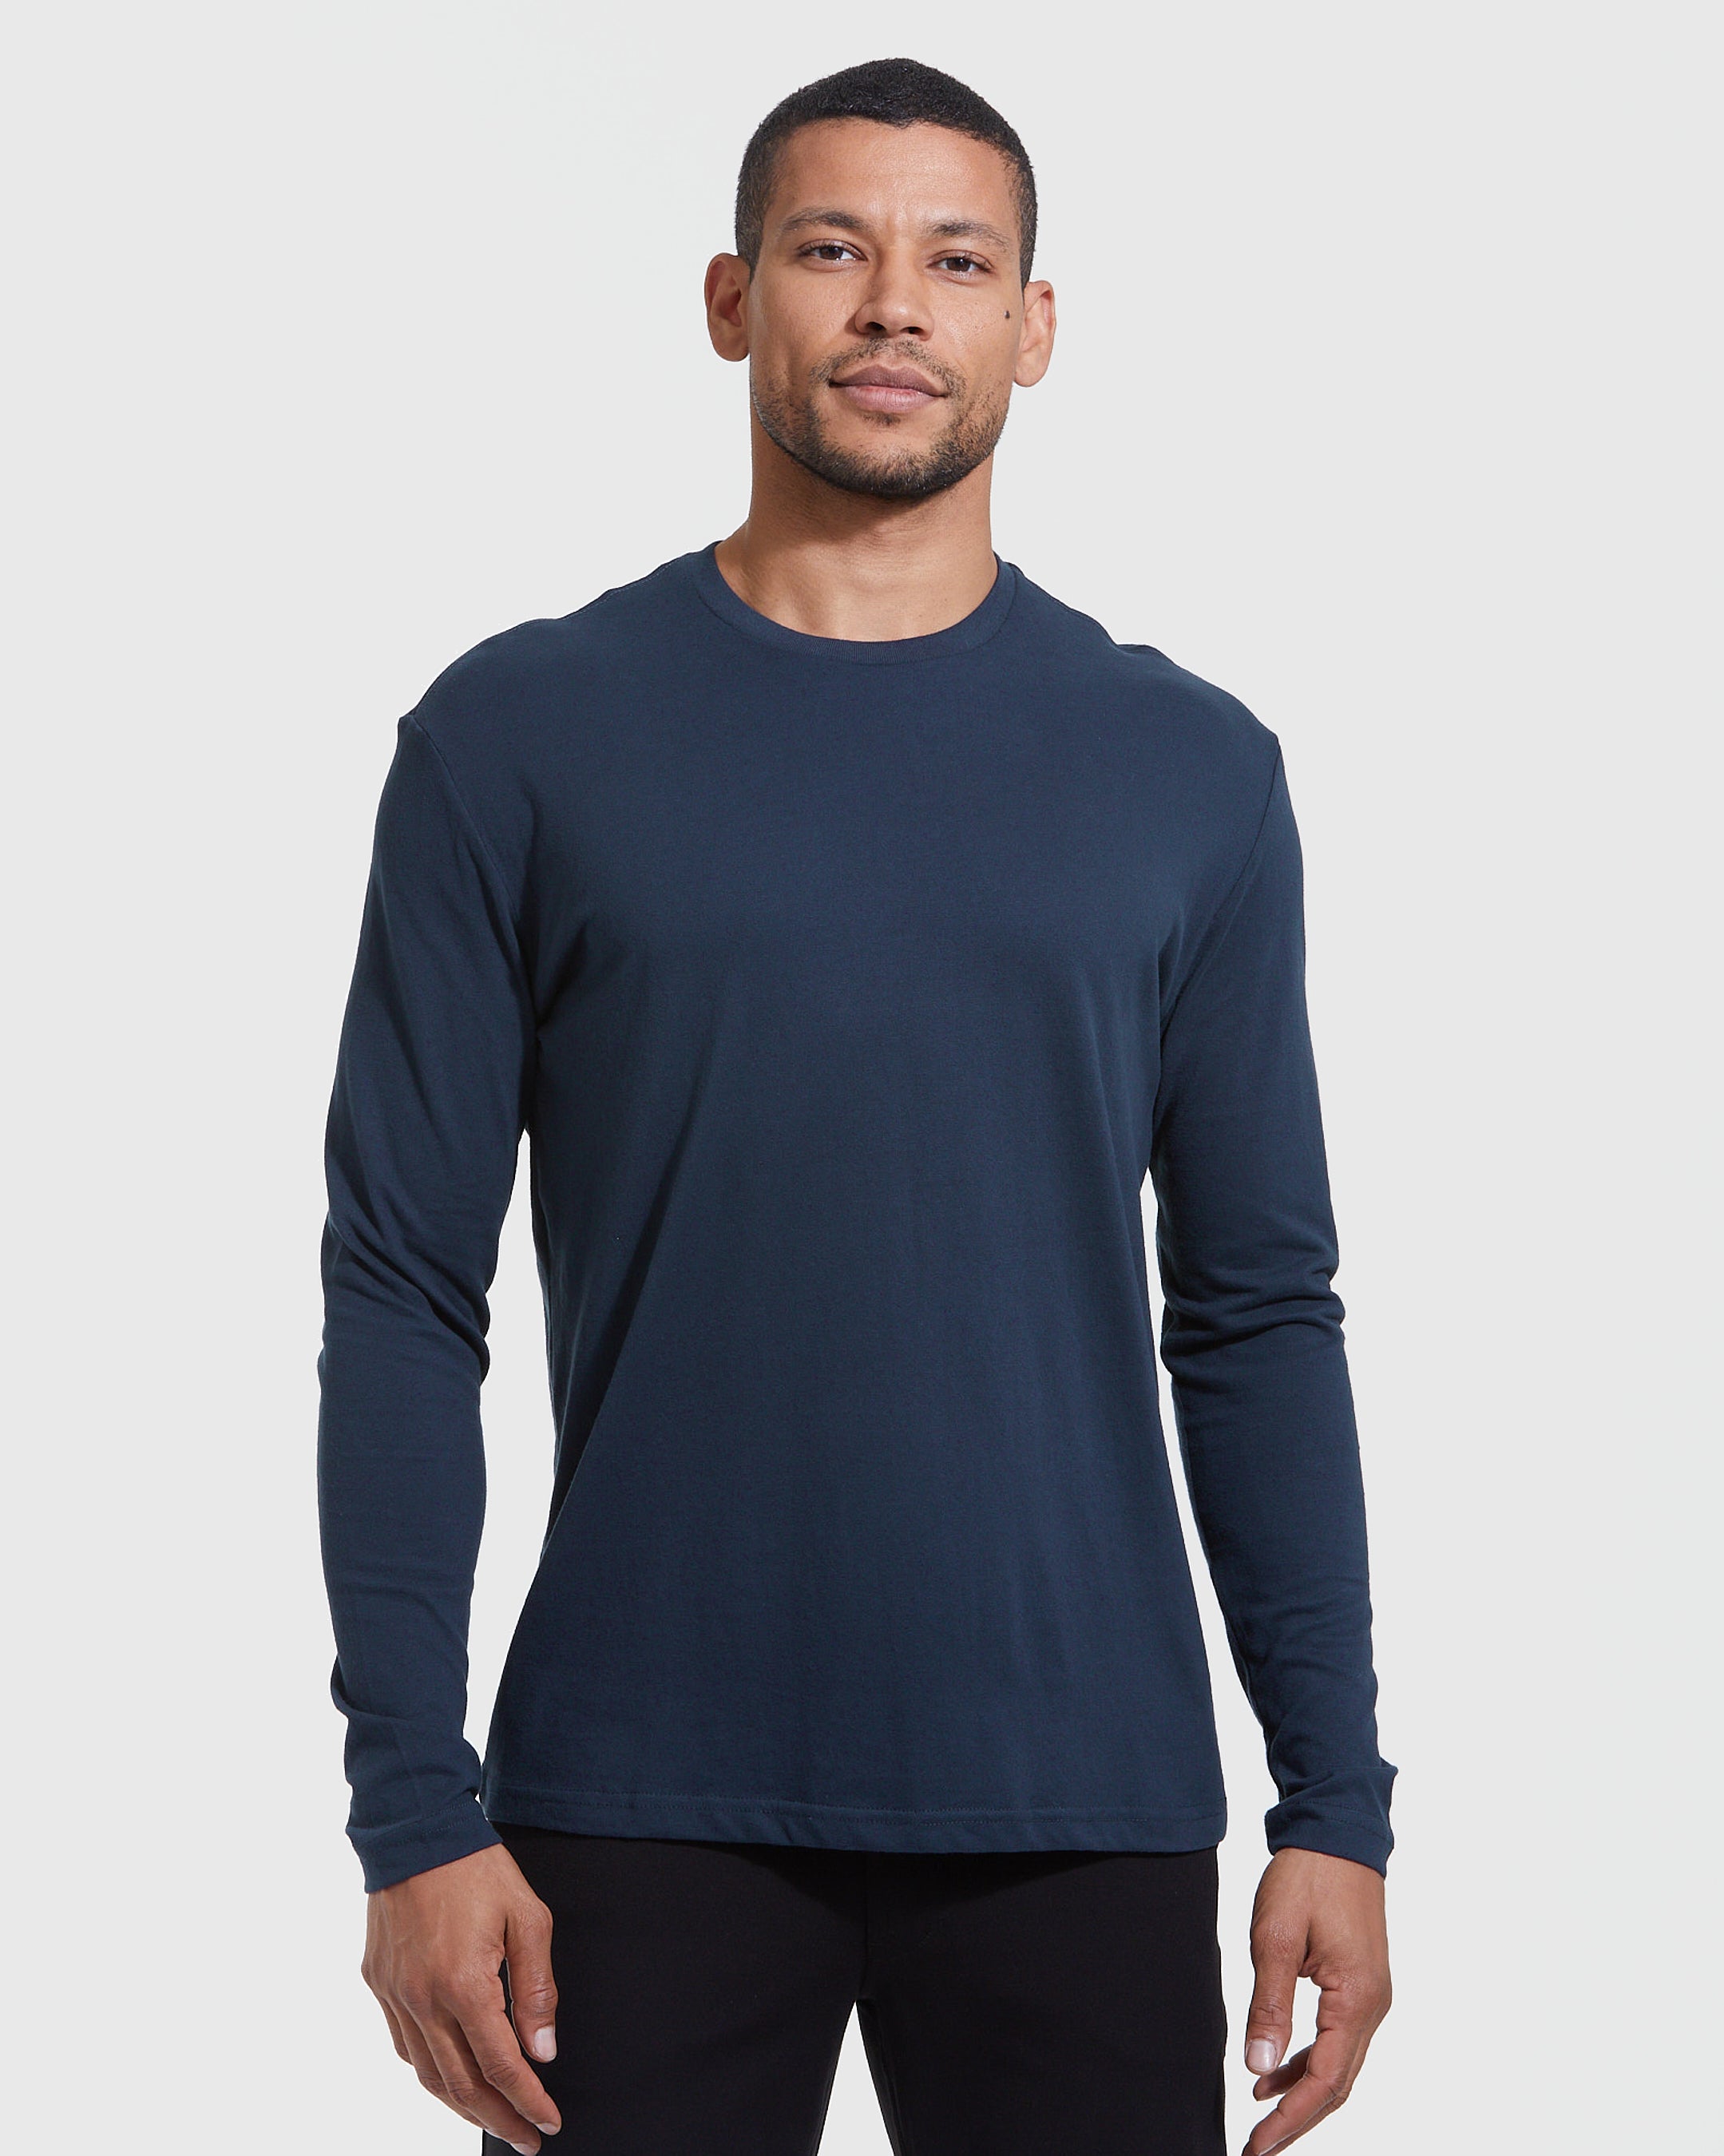 All Navy Long Sleeve Crew 3-Pack